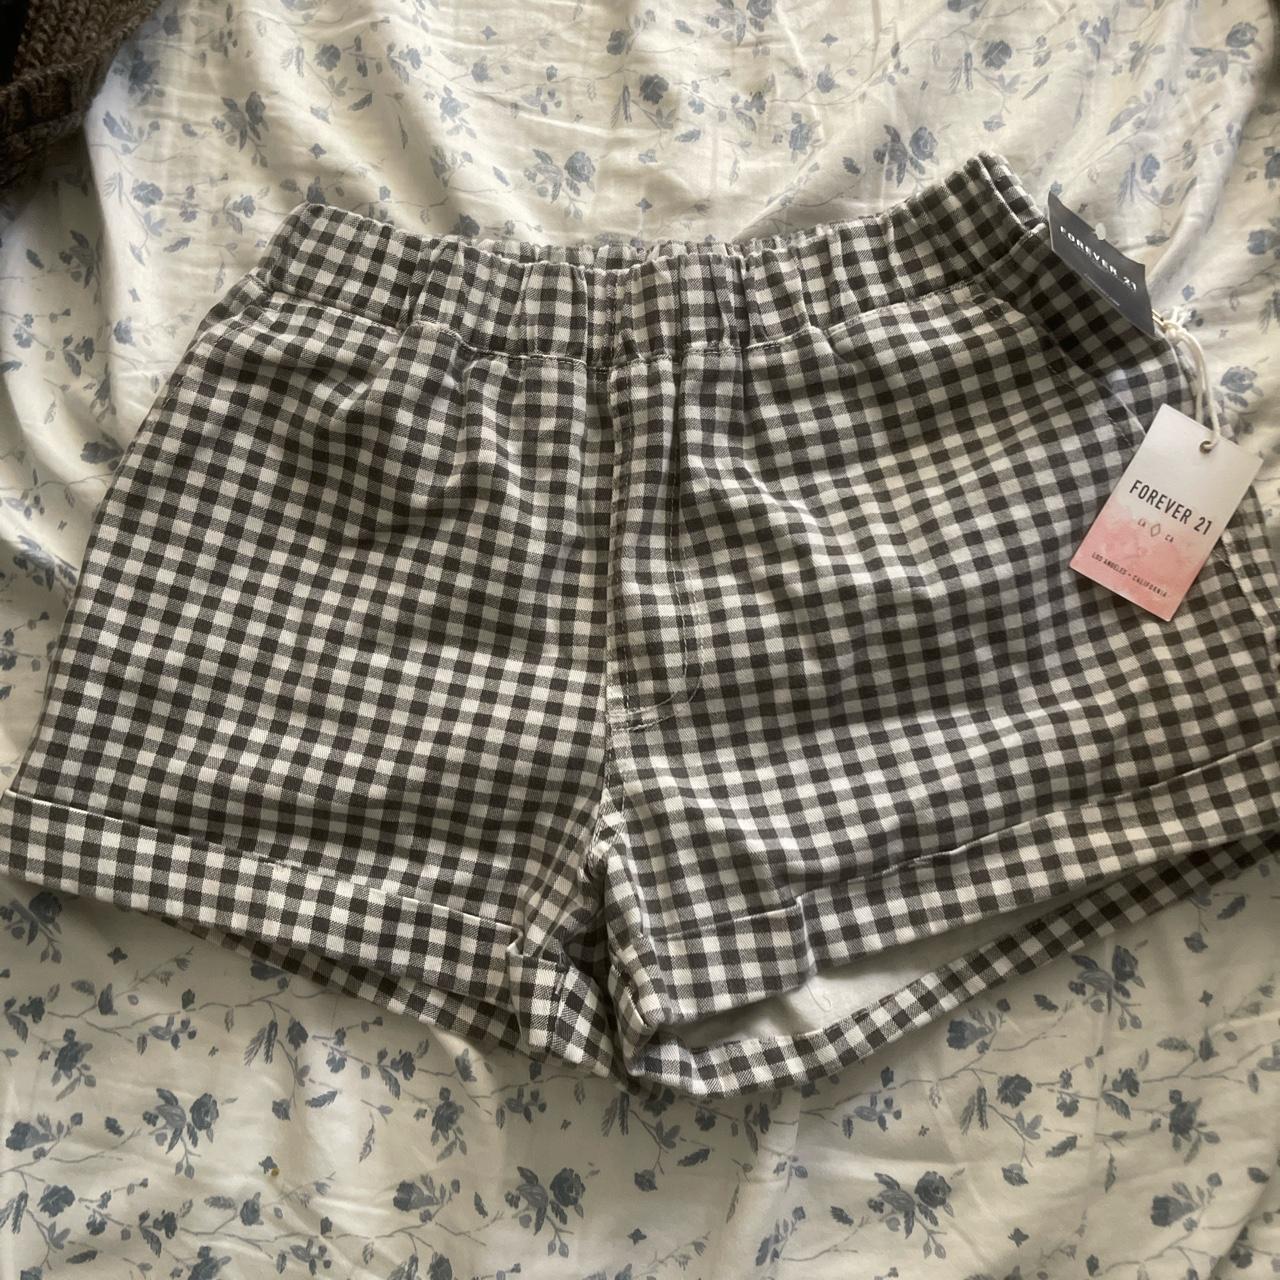 Black and white gingham shorts Brand new with tags - Depop